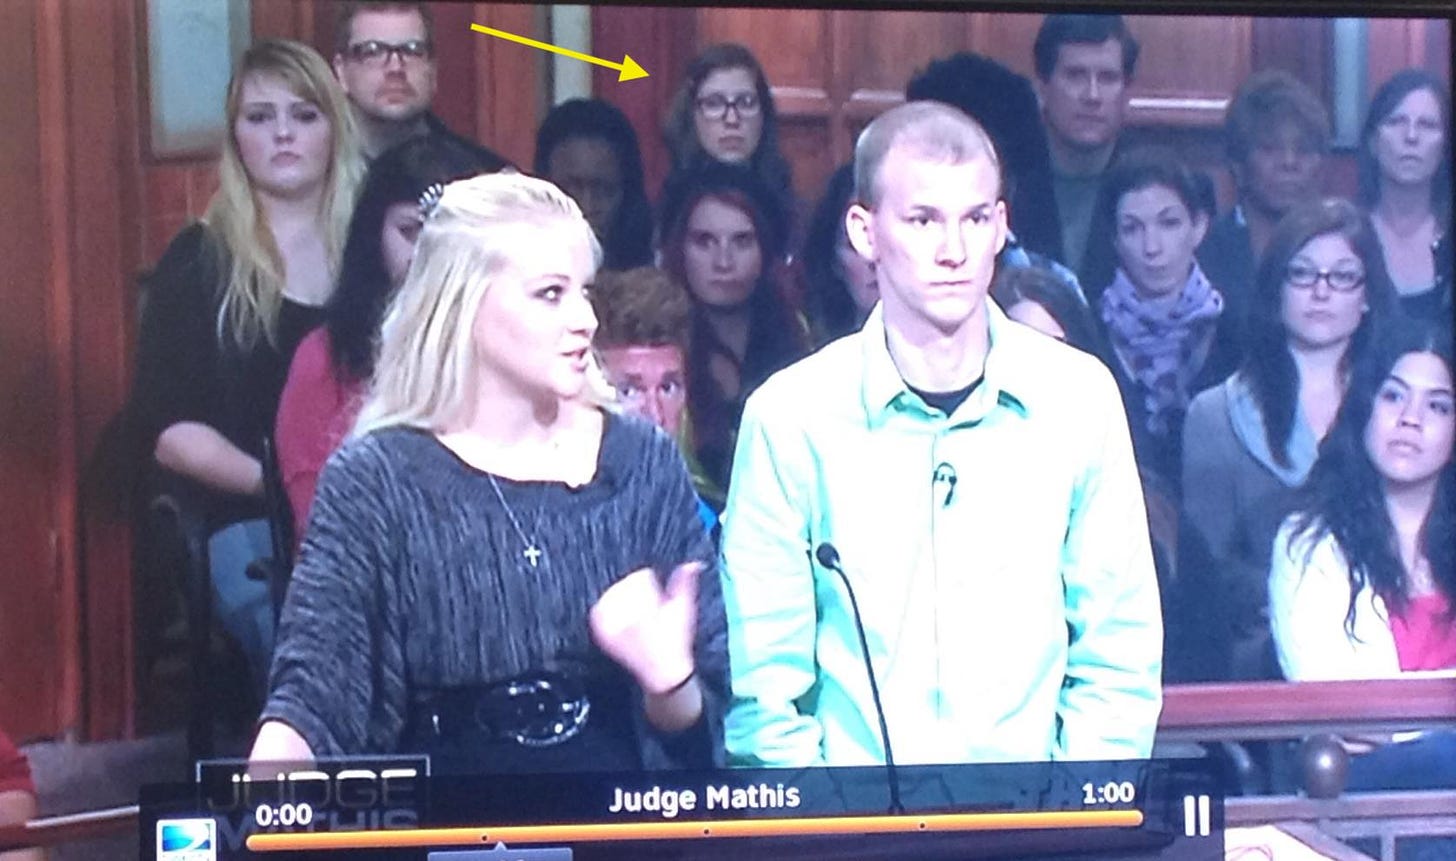 The audience in the background of an episode of Judge Mathis, with a yellow arrow pointing at the author